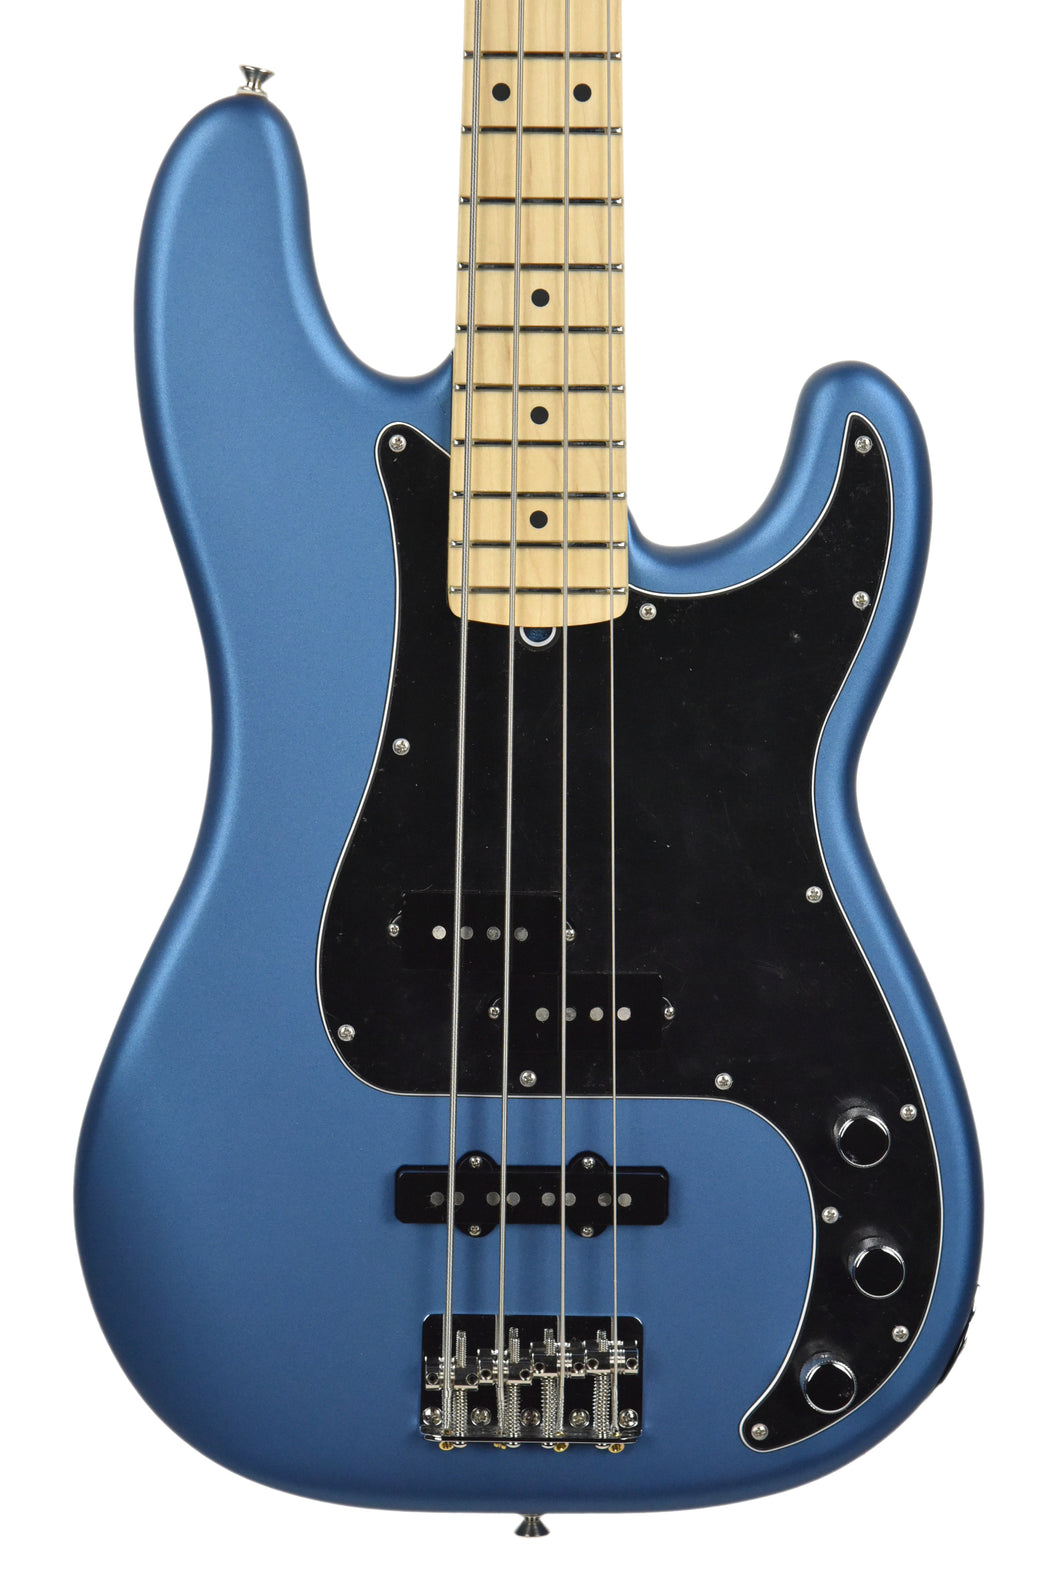 Fender American Performer P Bass in Satin Lake Placid Blue US18092791 - The Music Gallery